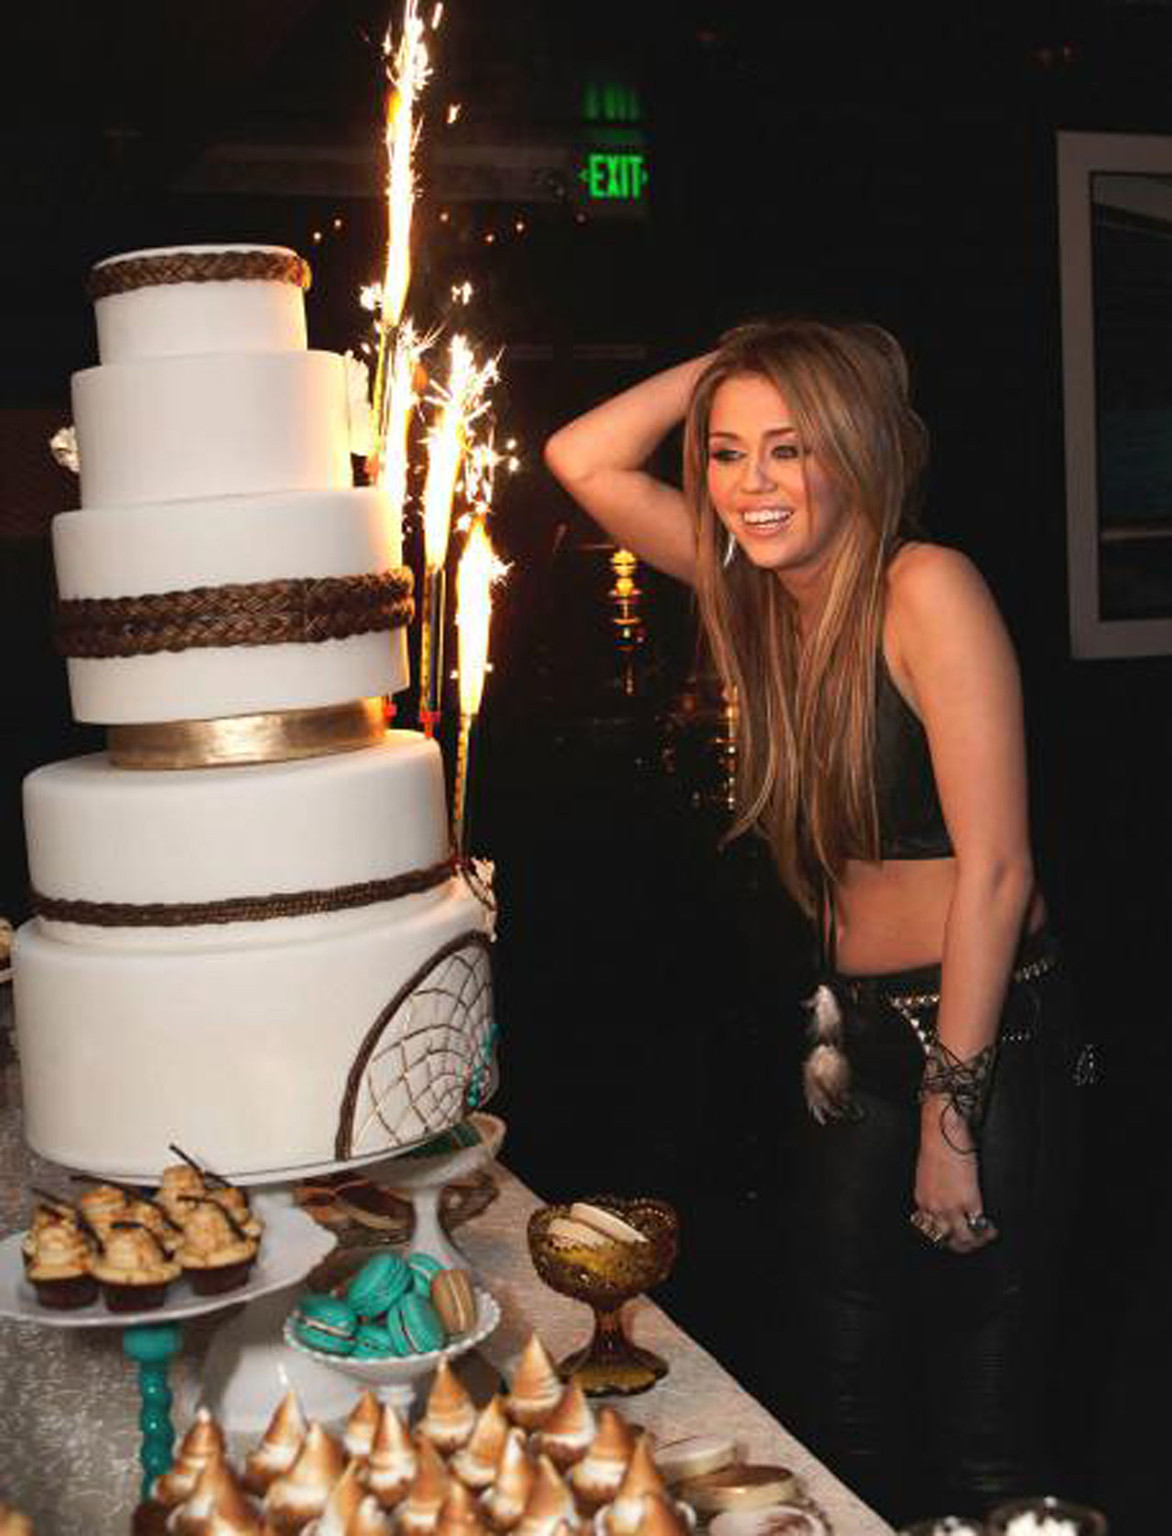 Miley Cyrus young and cute singer celebrated her eighteenth birthday #75325344